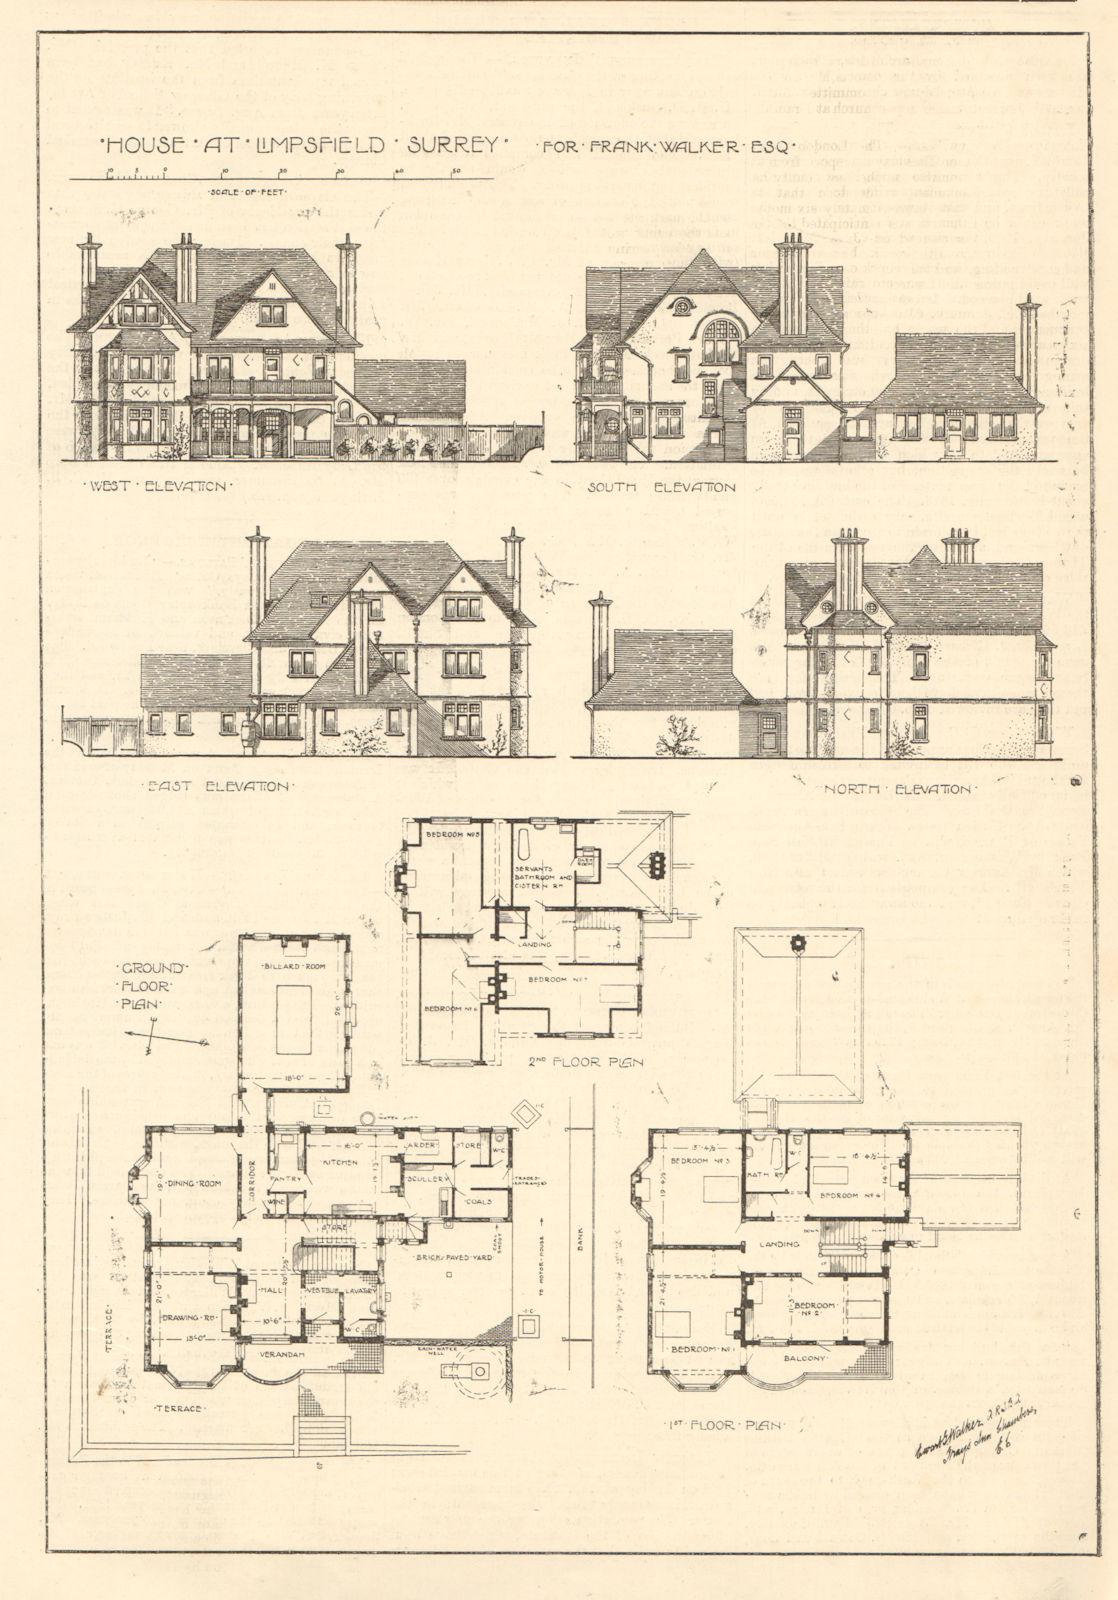 Associate Product House at Limpsfield, Surrey, for Frank Walker Esq. Elevations & plans 1907